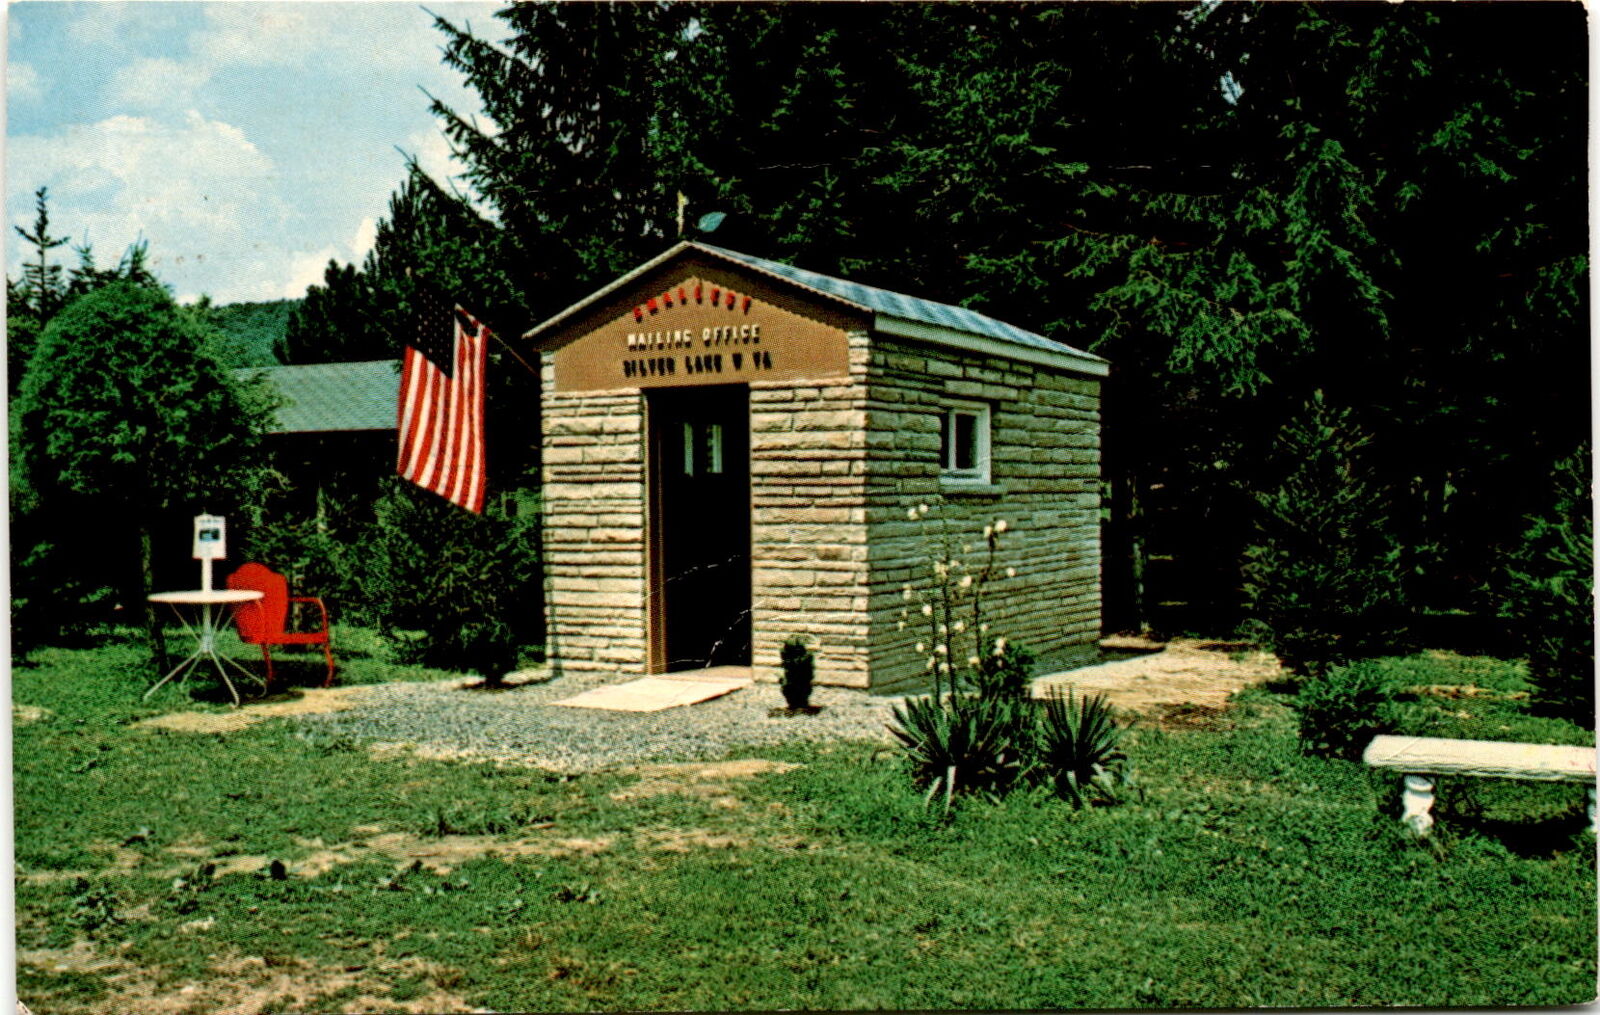 Vintage Postcard: Small Mailing Office near Smallest Church